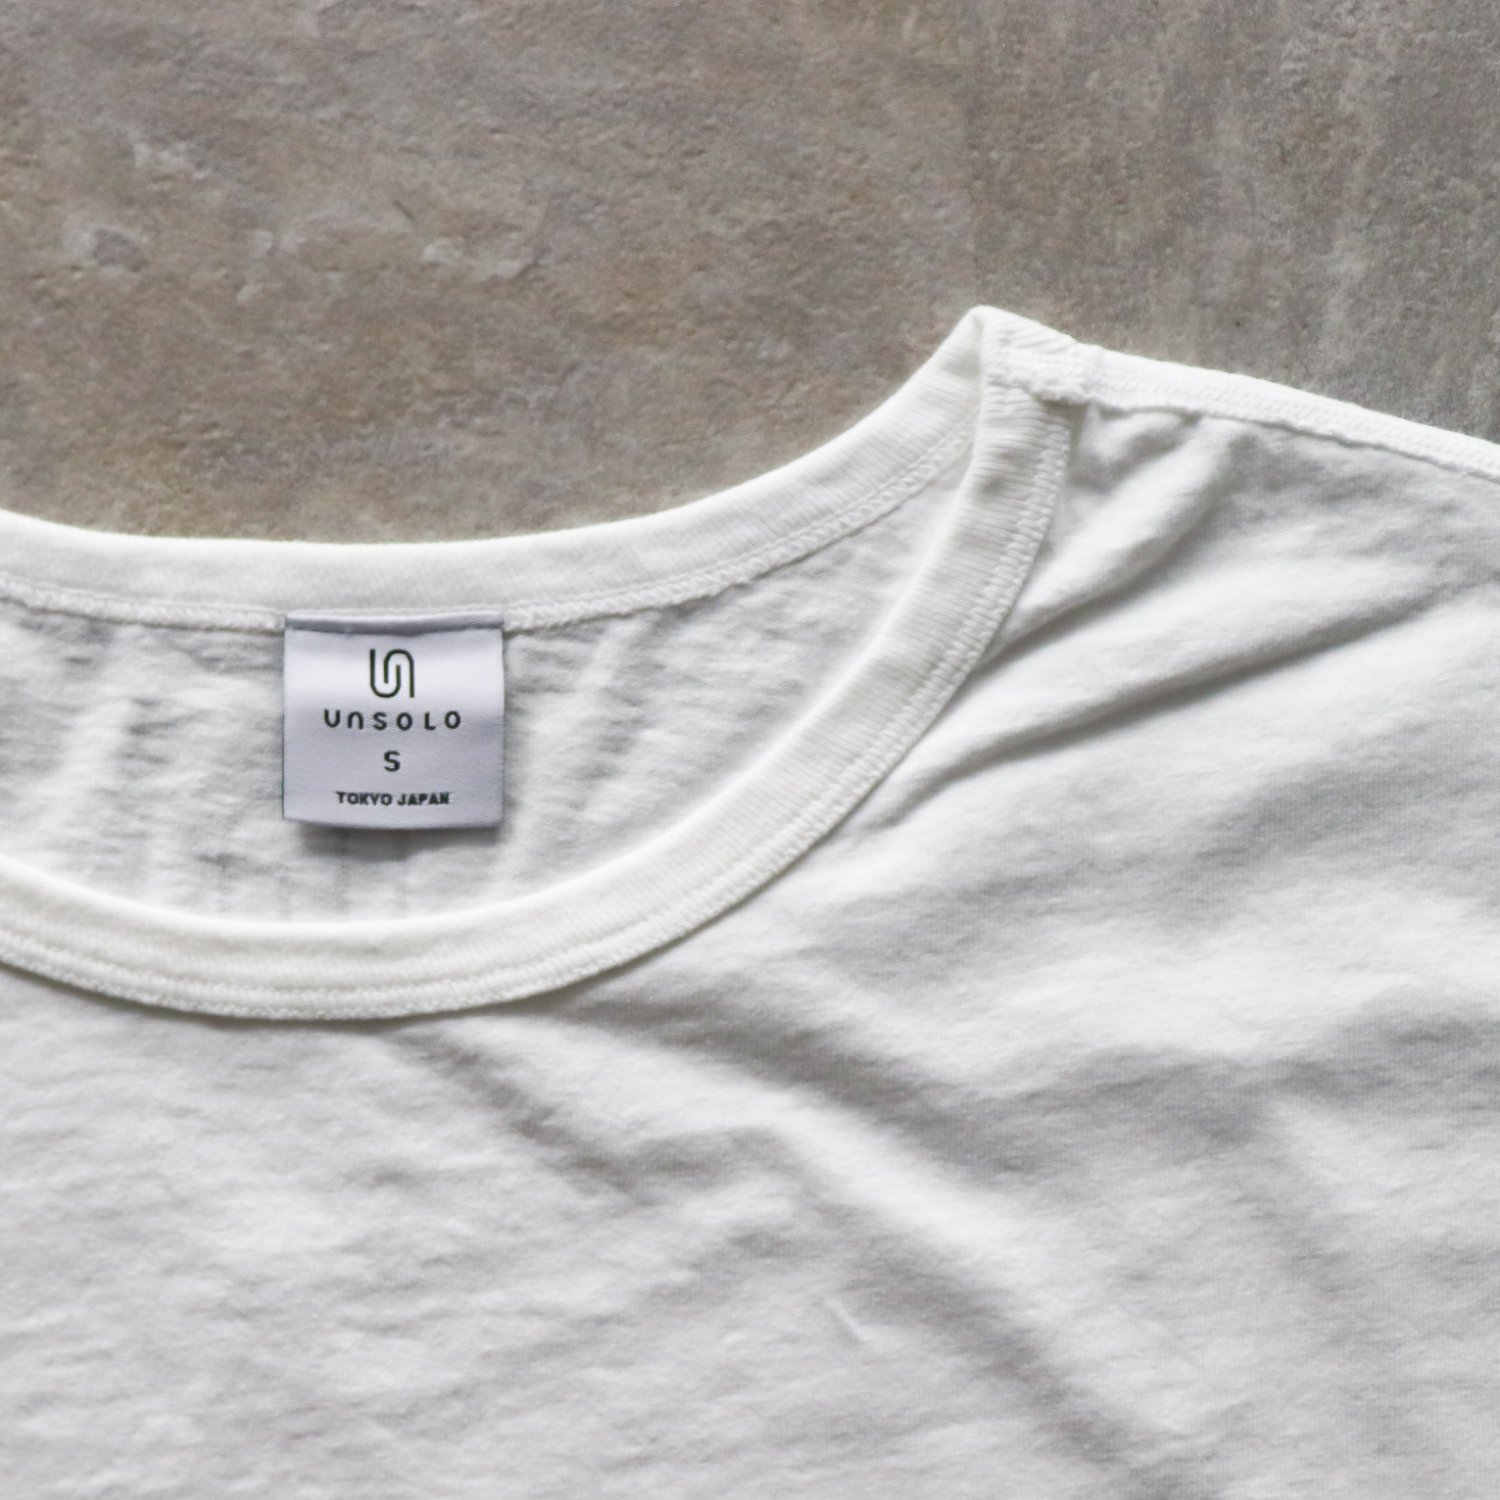 UNSOLO LOGO LOOSE FIT TEE | UNSOLO